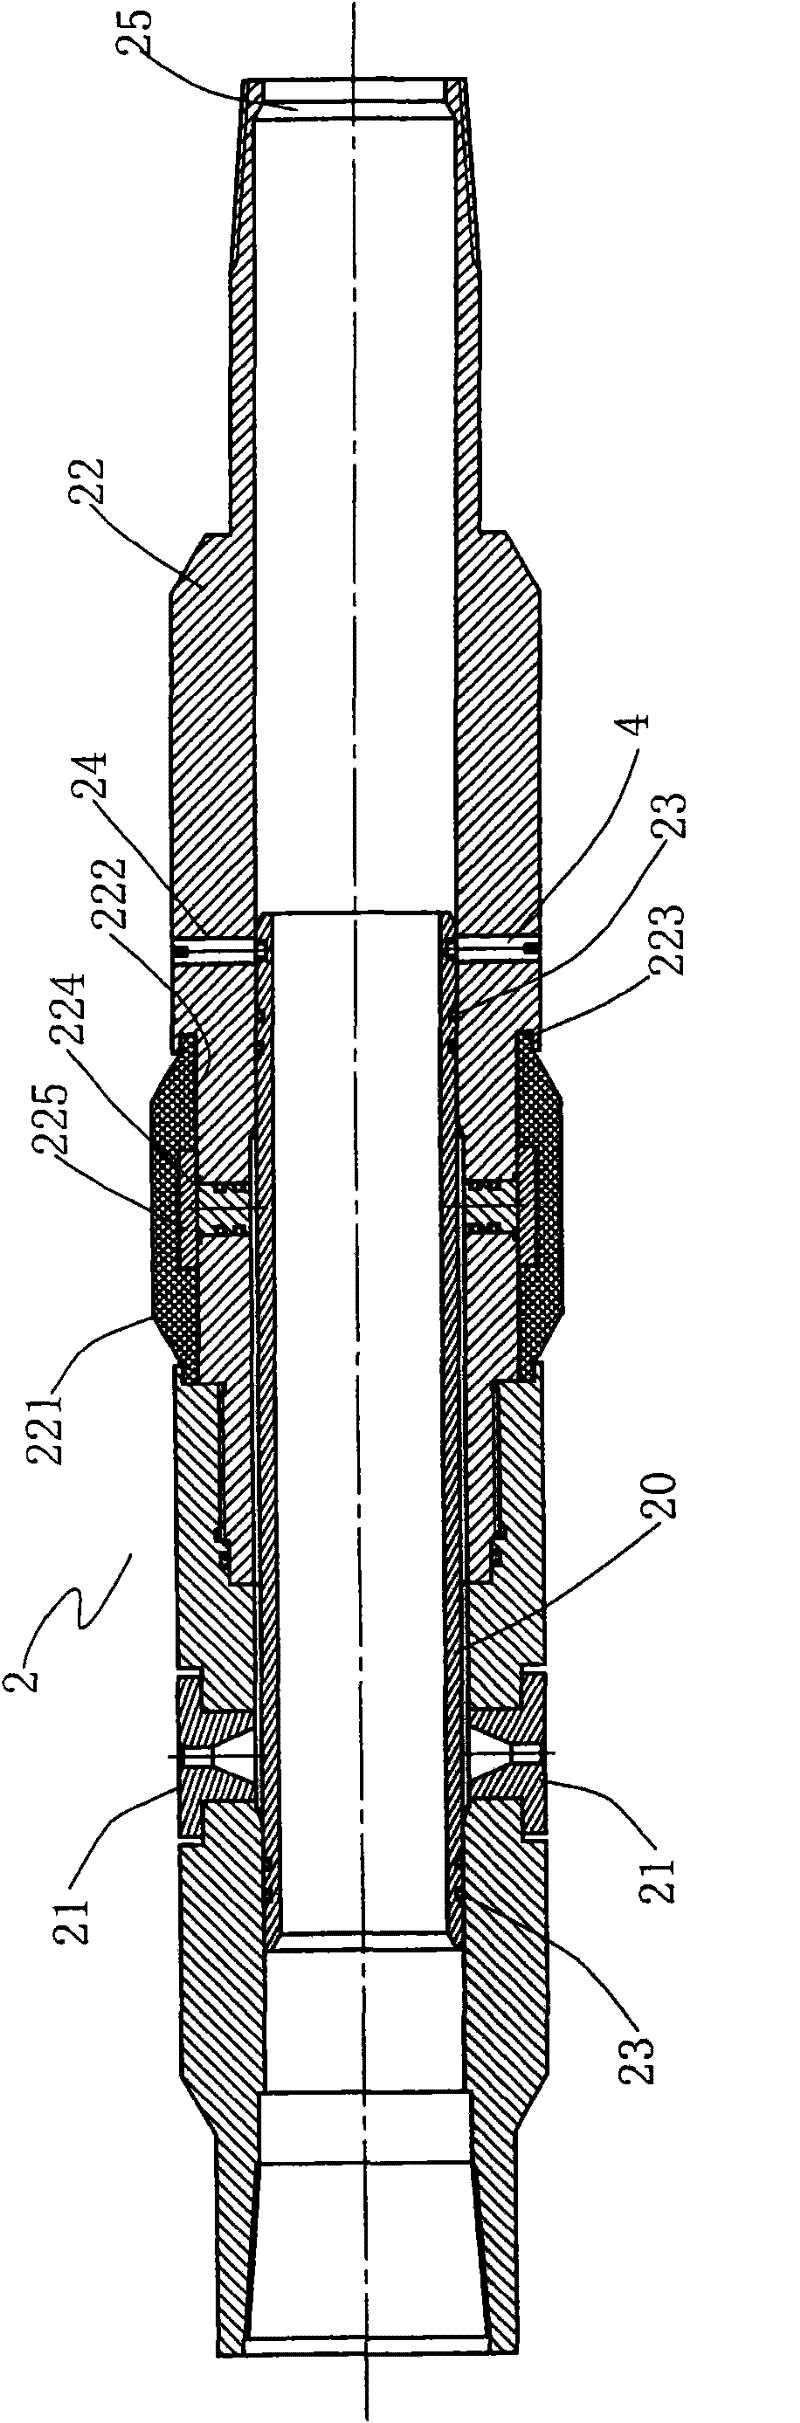 Abrasive jetting device and method for abrasive jetting flow and jetting perforation and multiple fracturing